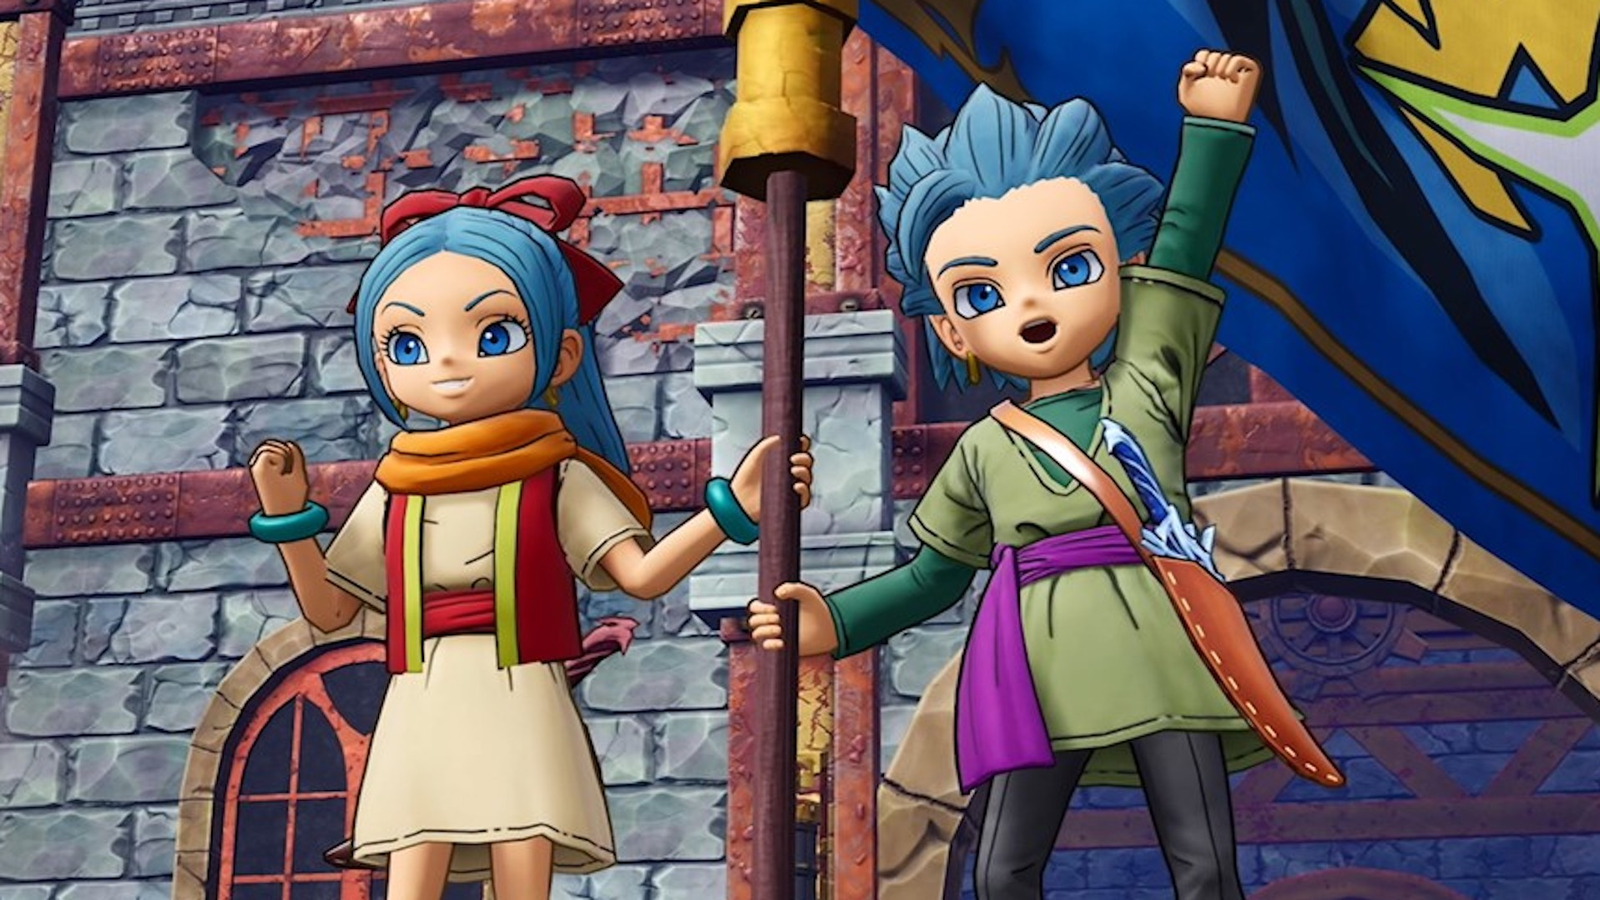 Dragon Quest XI's treasure-hunting prequel is out now on PC